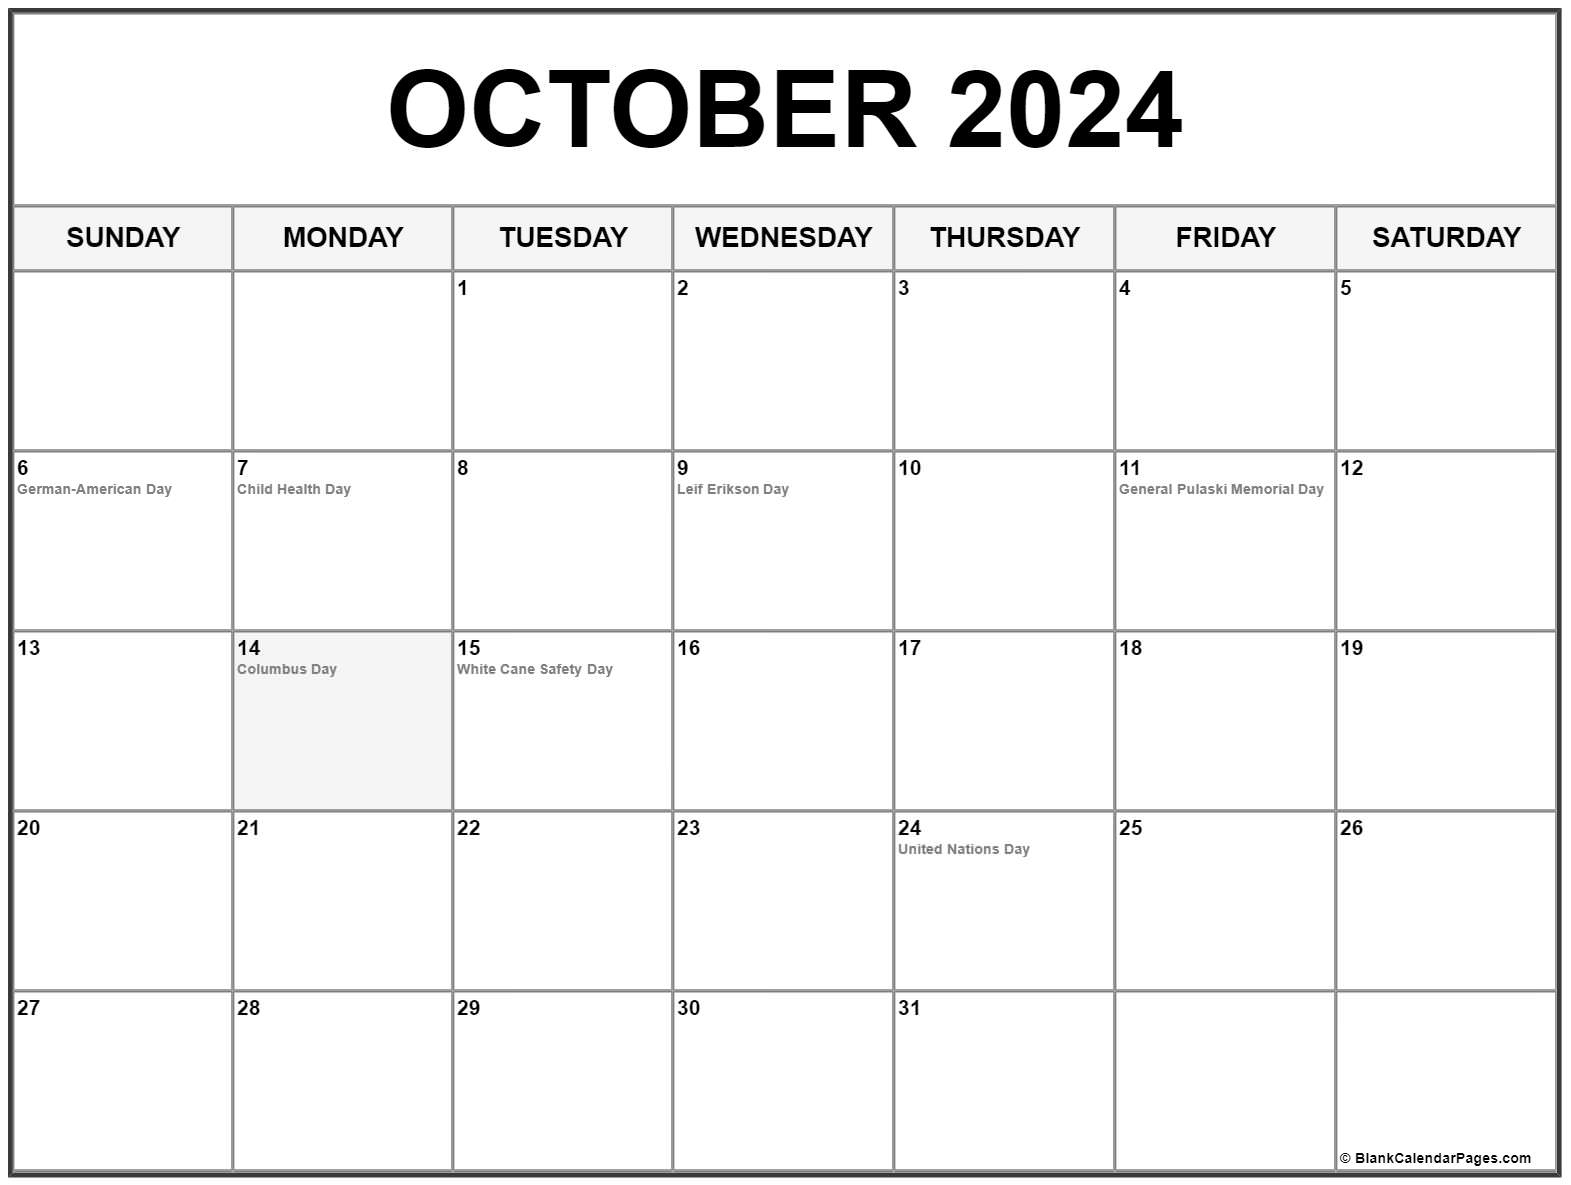 Calendar October 2024 With Holidays Free Printable 2024 Calendar With - Free Printable 2024 Calendar With Holidays And Seasons